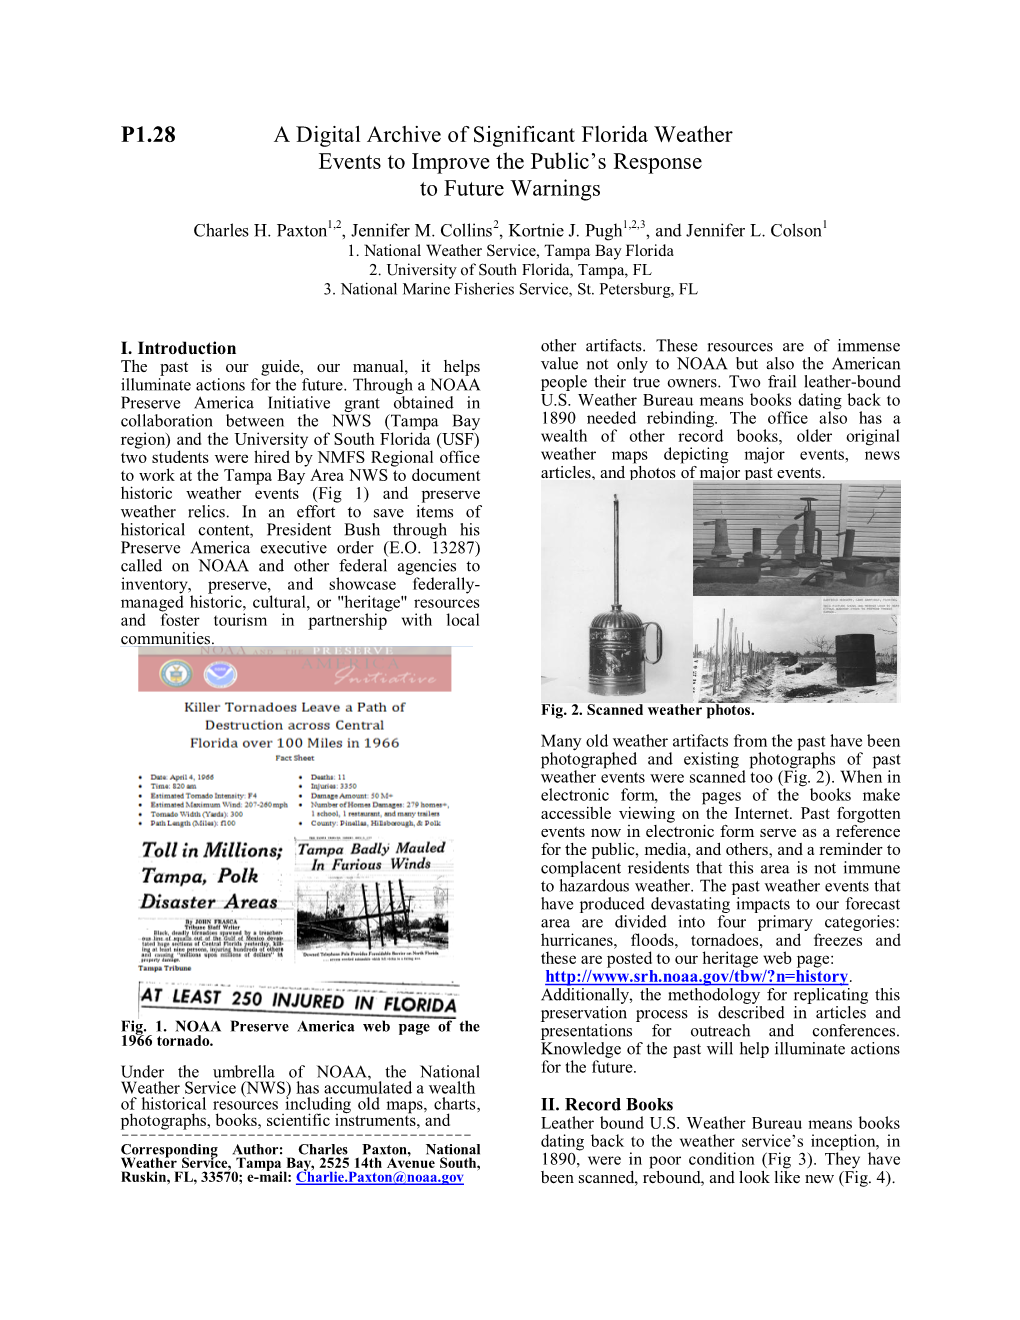 P1.28 a Digital Archive of Significant Florida Weather Events to Improve the Public’S Response to Future Warnings